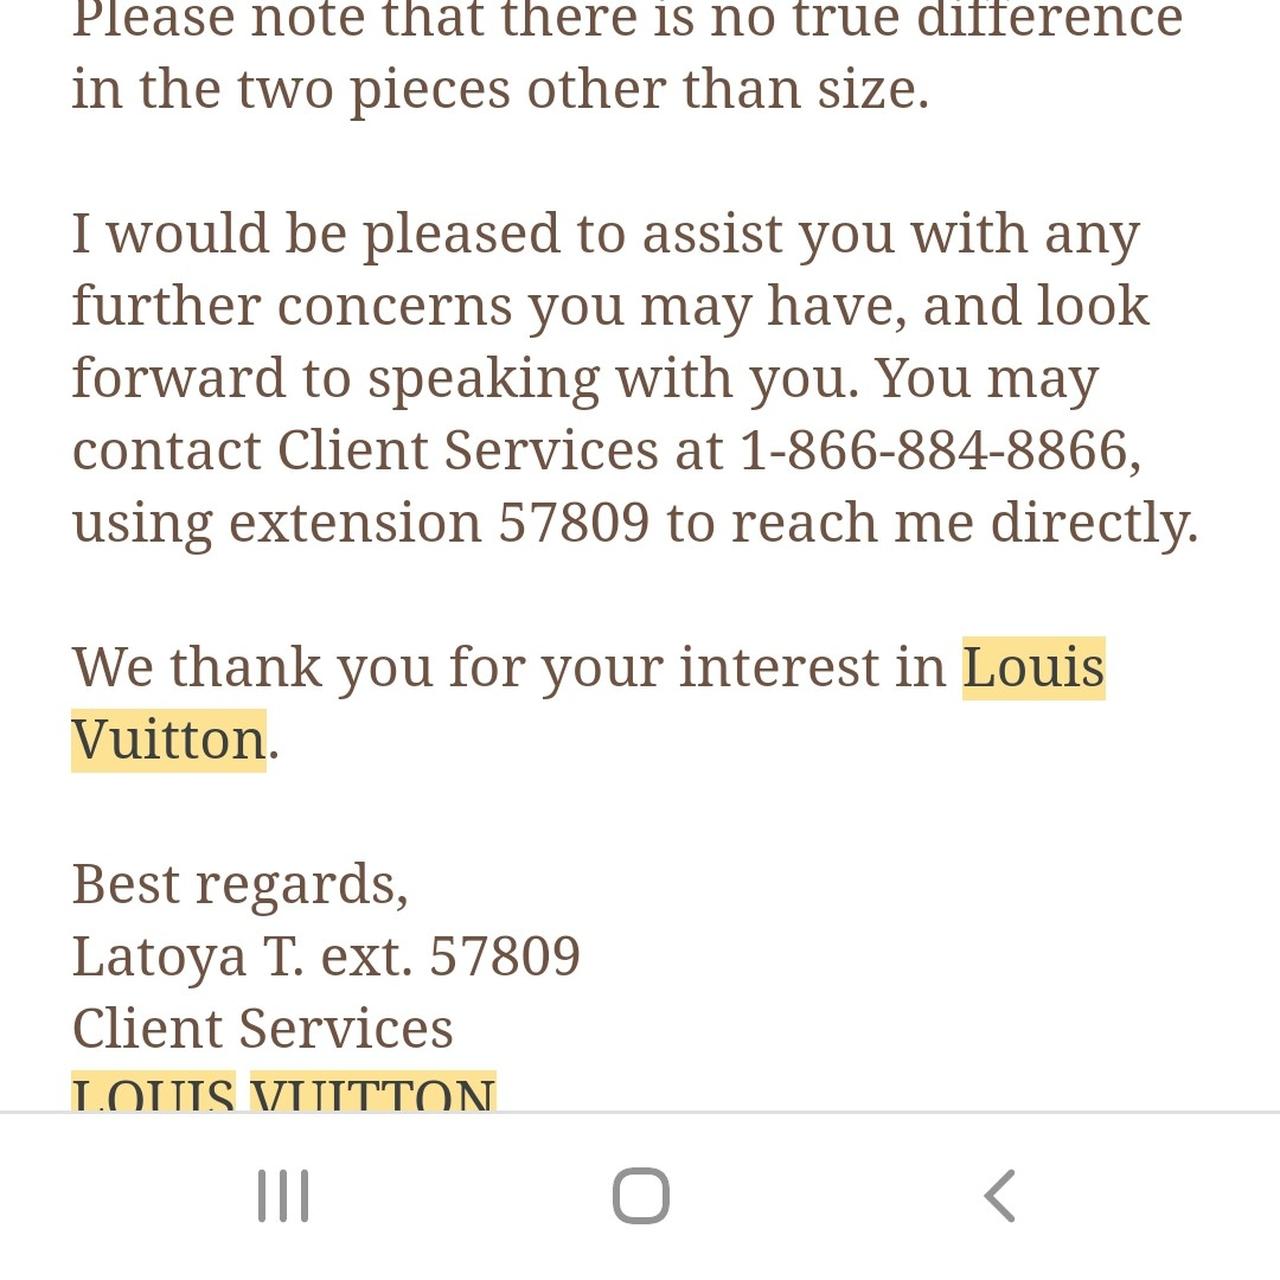 louis vuitton order email